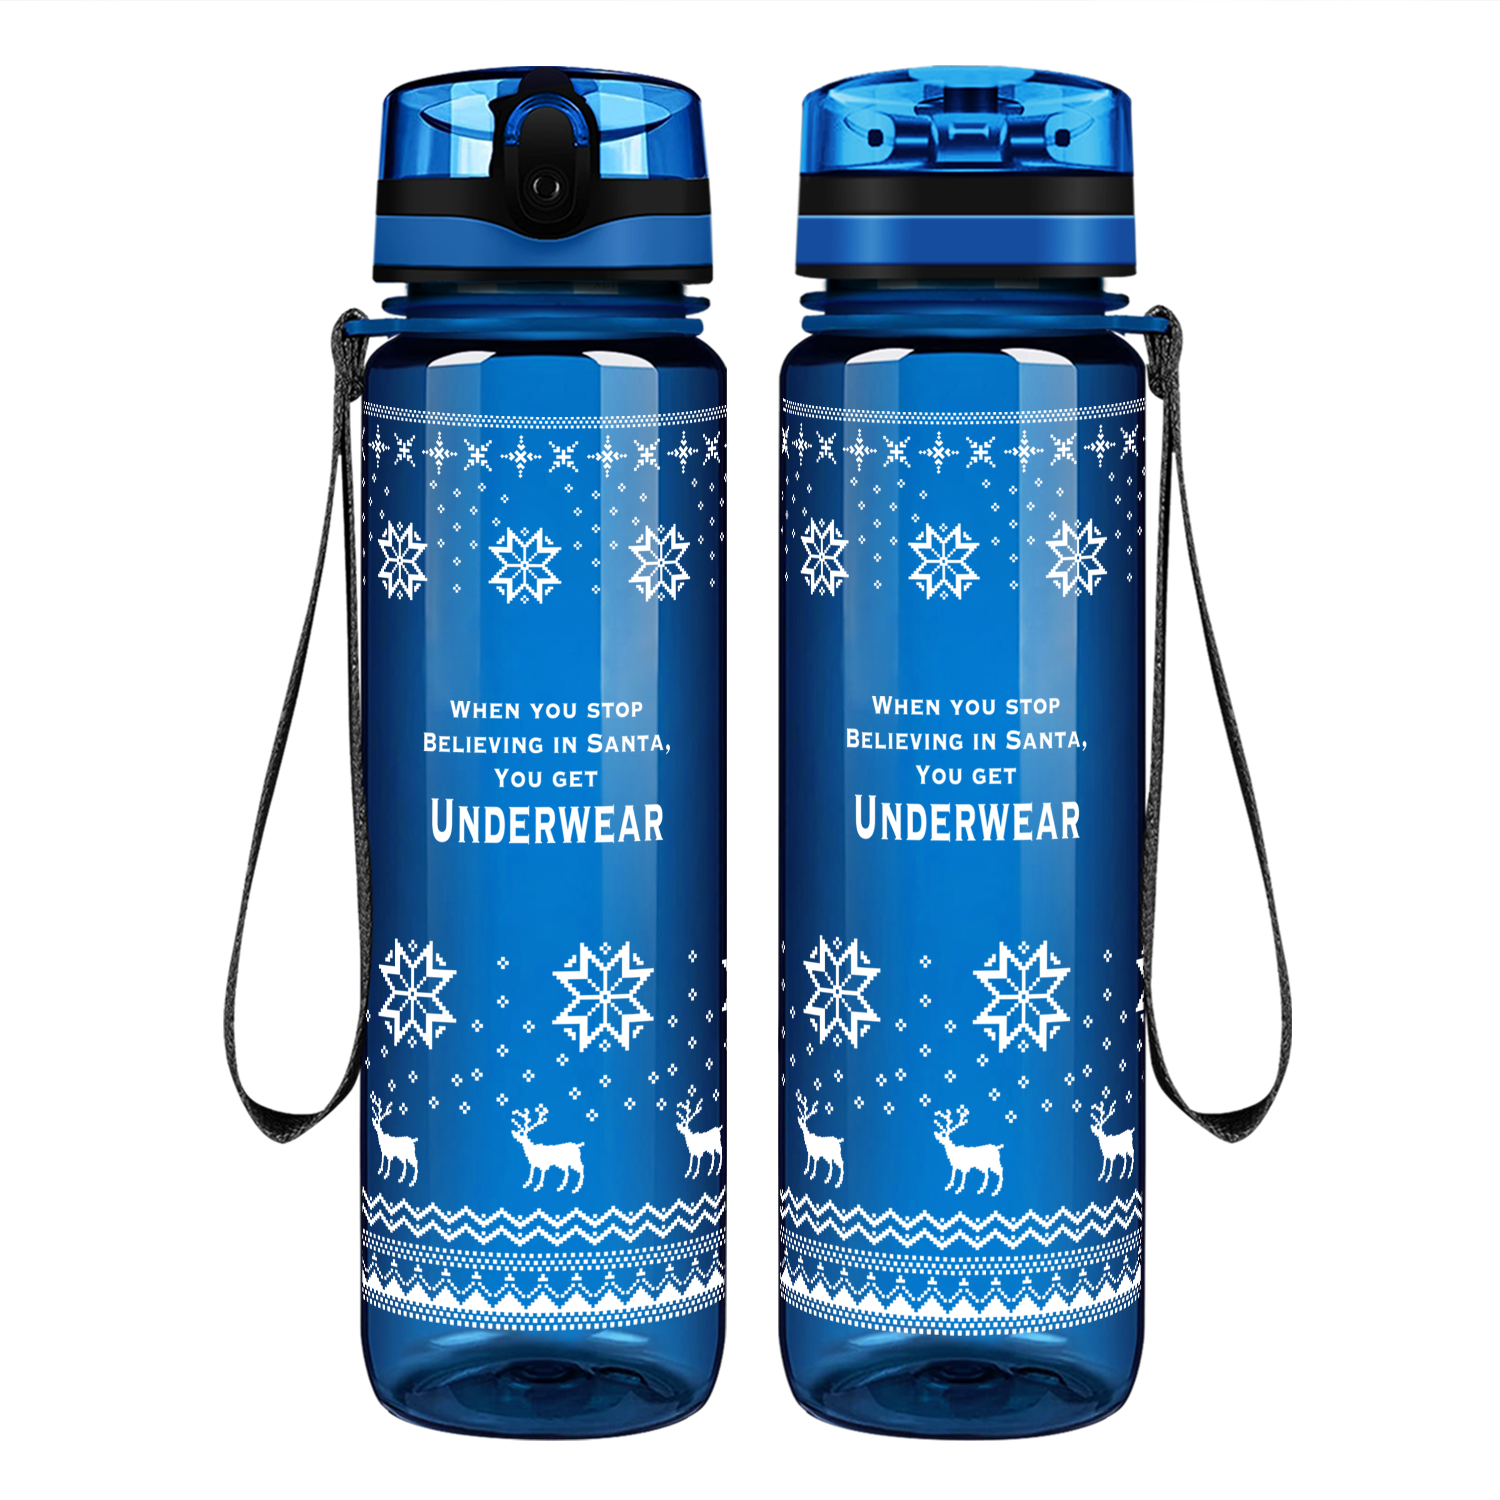 When You Stop Believing in Santa Motivational Tracking Water Bottle